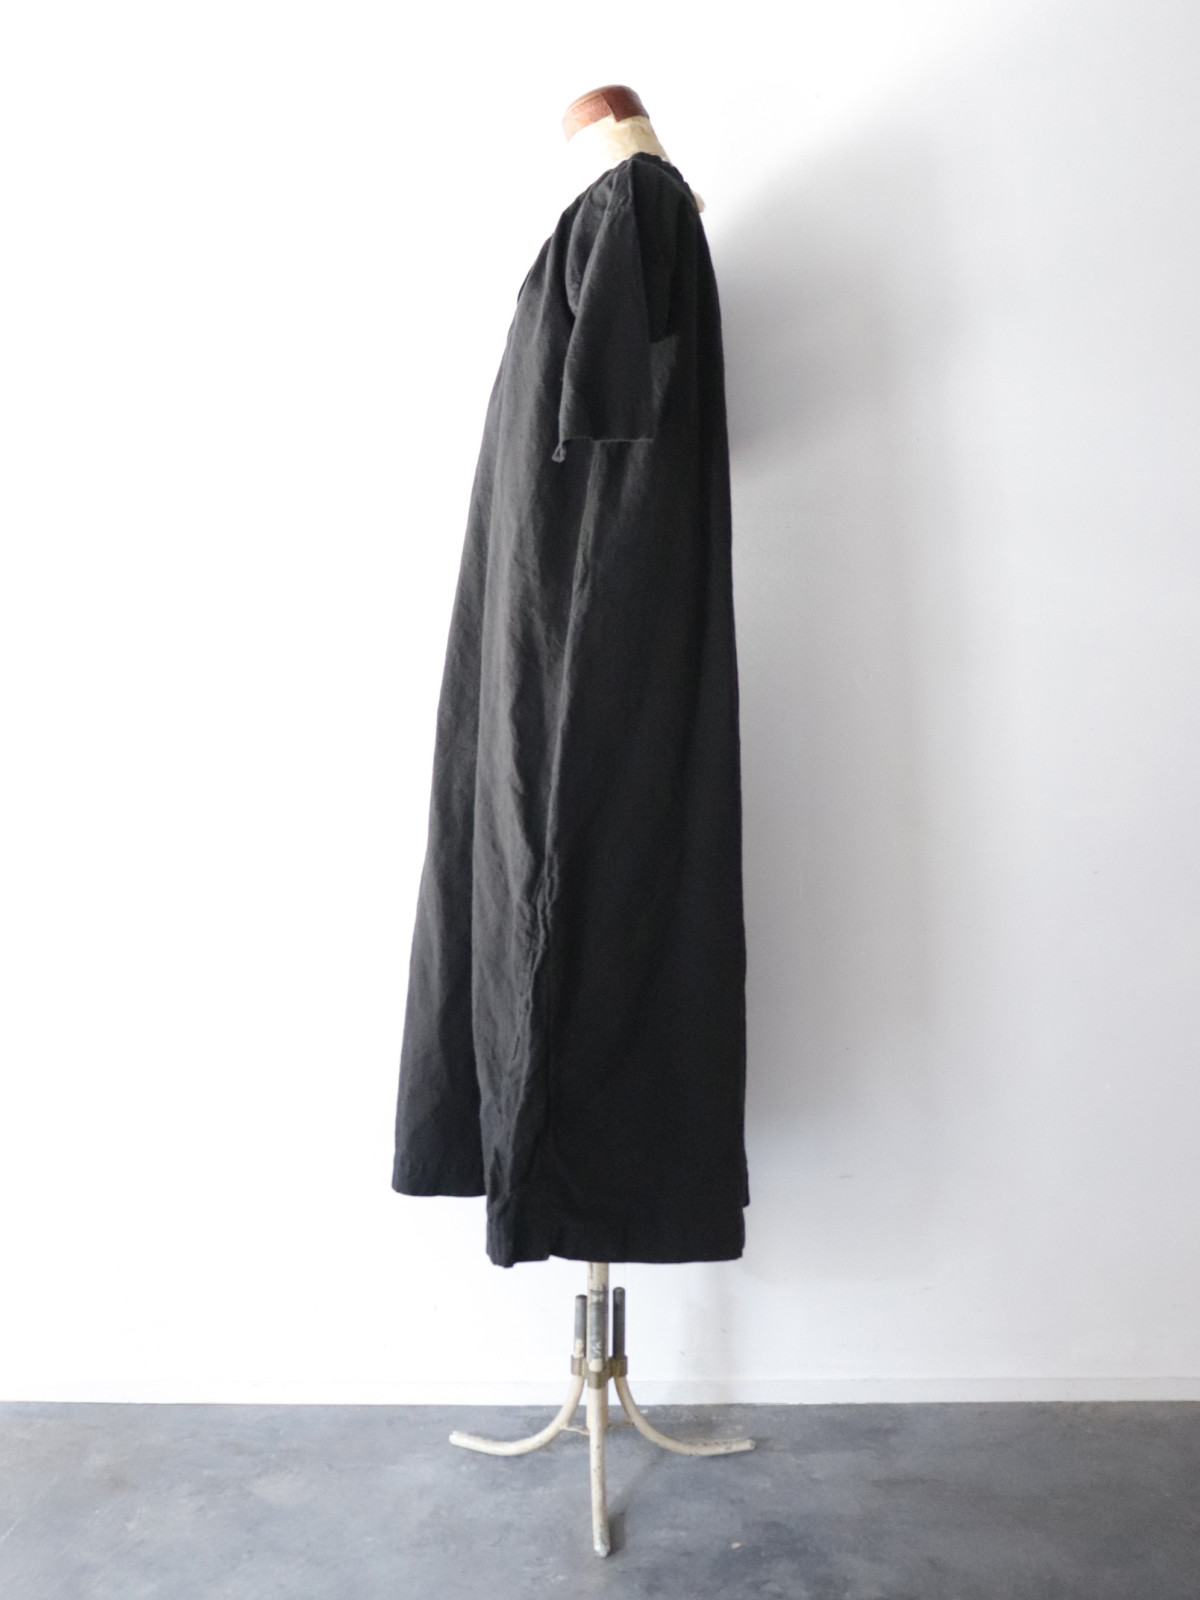 Black-dyed , french linen fabric, one-piece